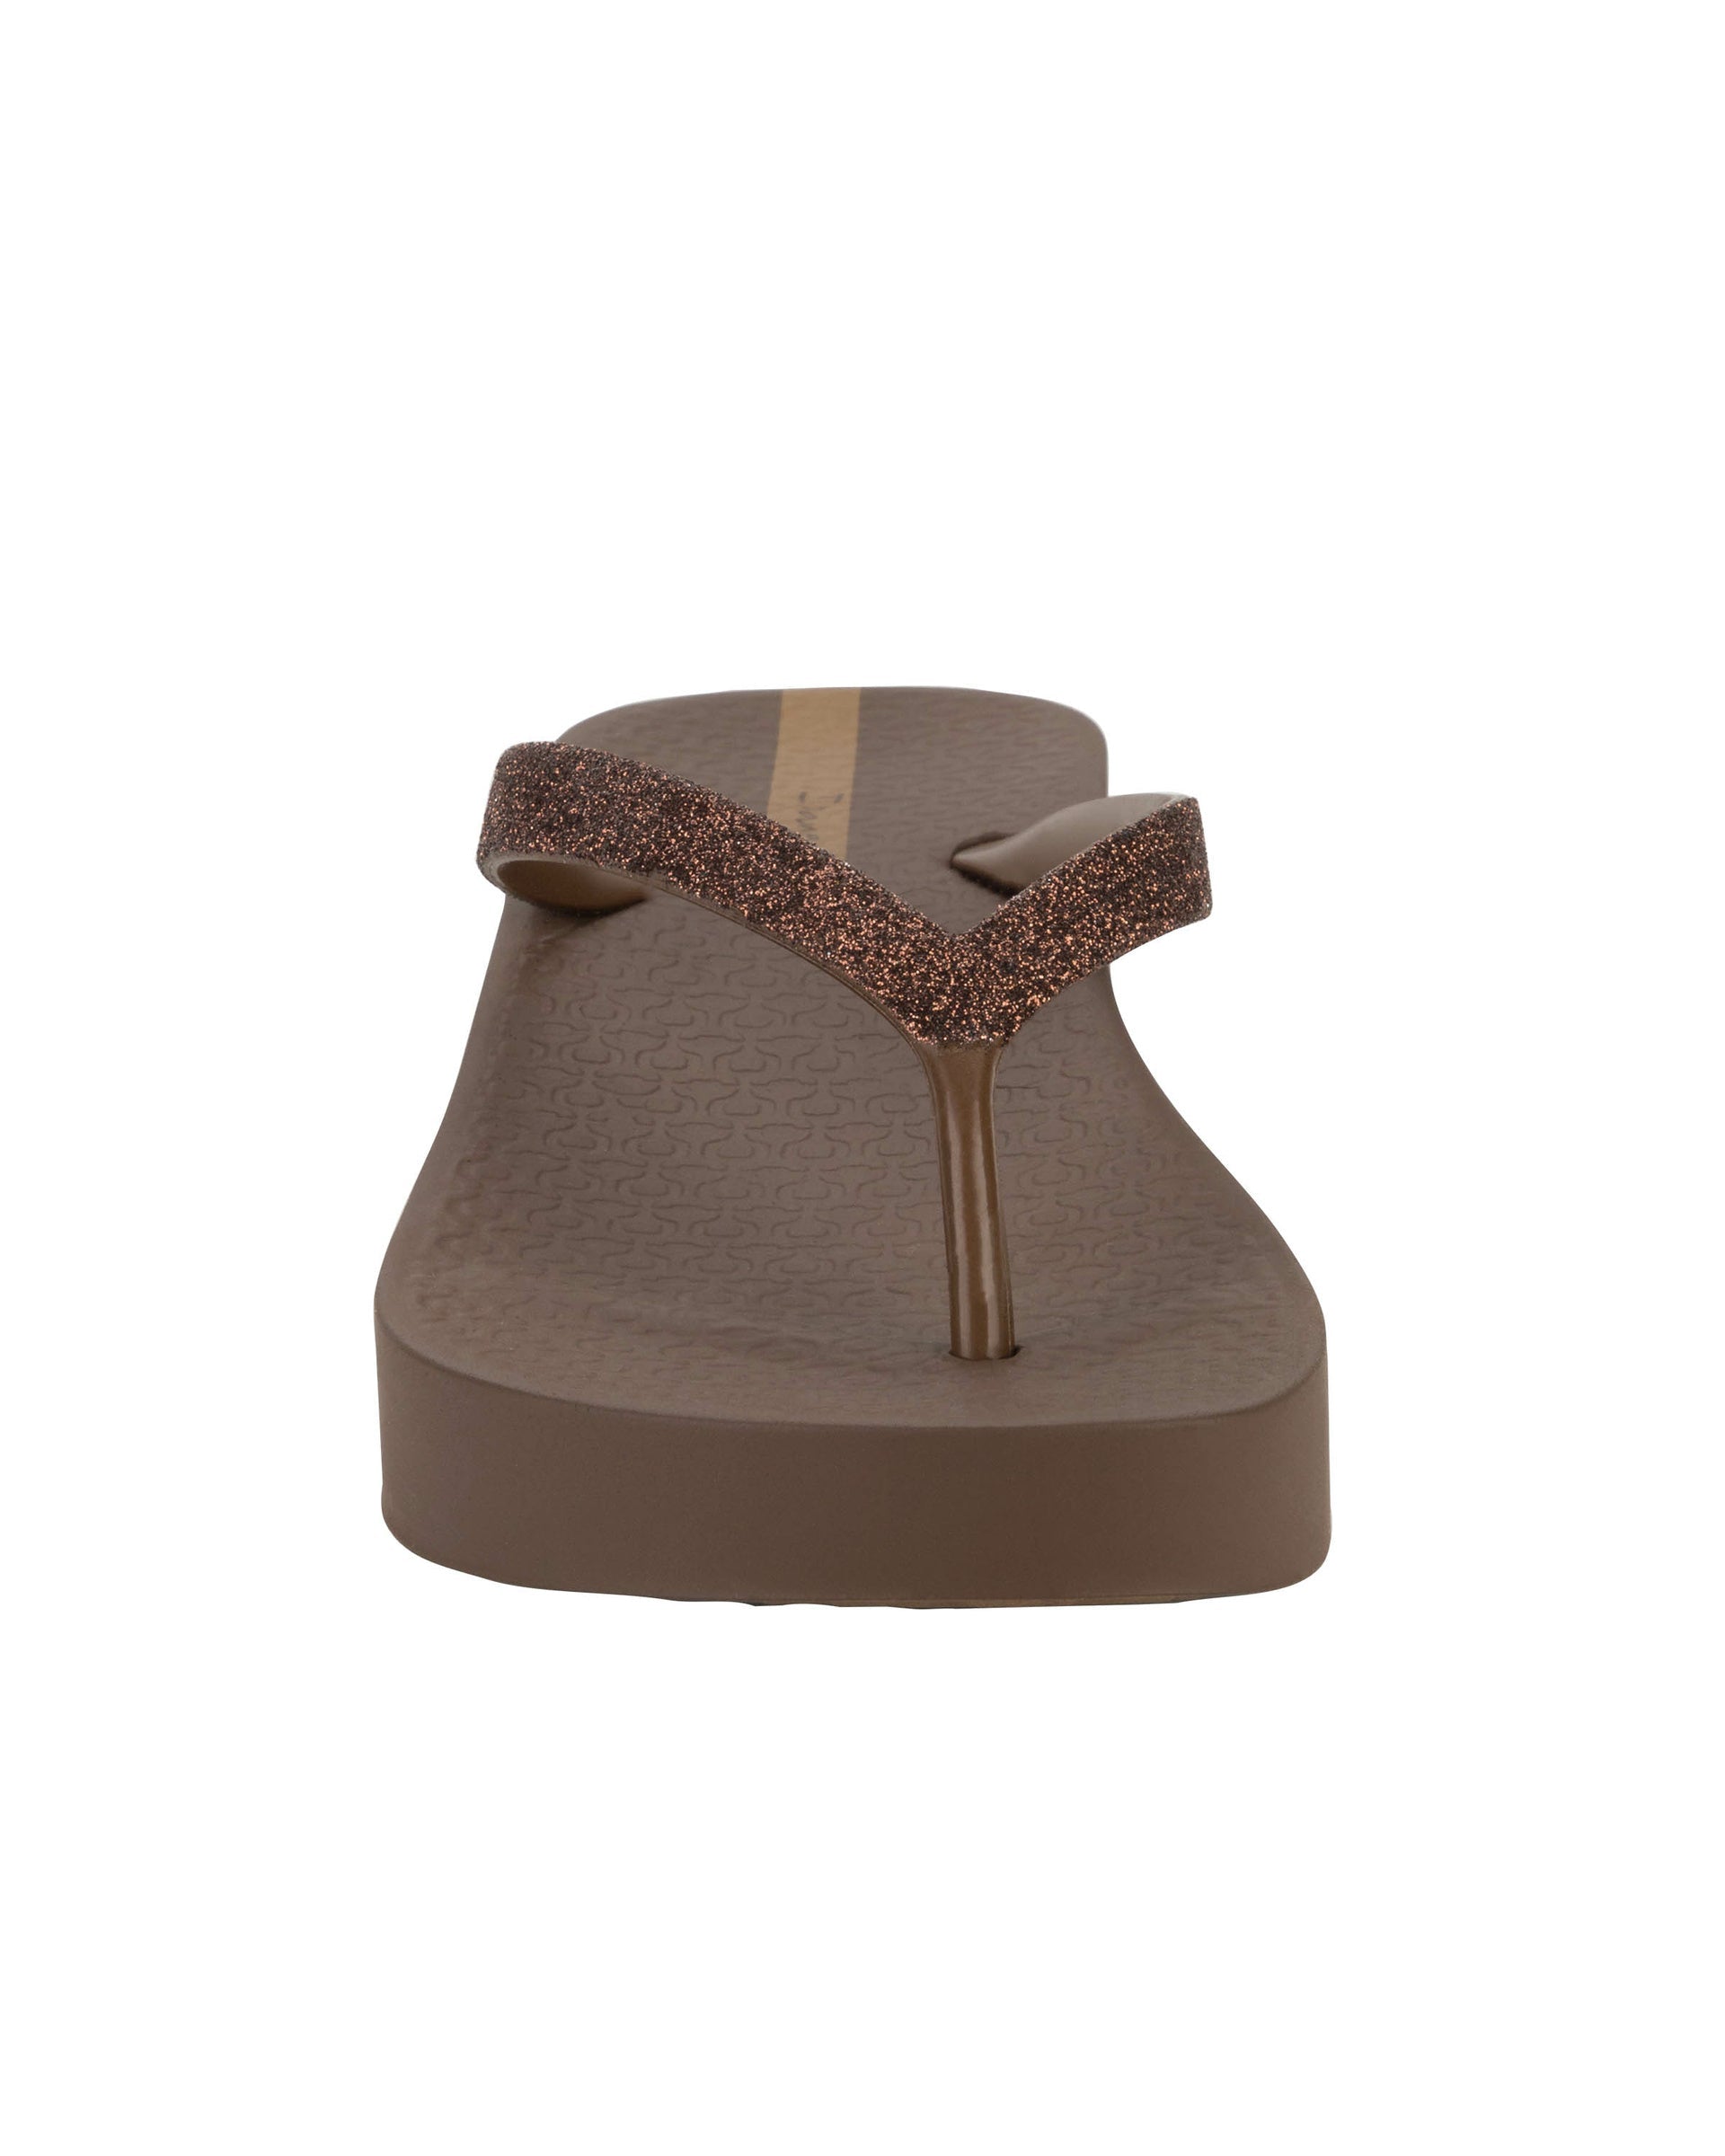 Front view of a brown Ipanema Mesh Chic women's wedge flip flop with glitter brown straps.